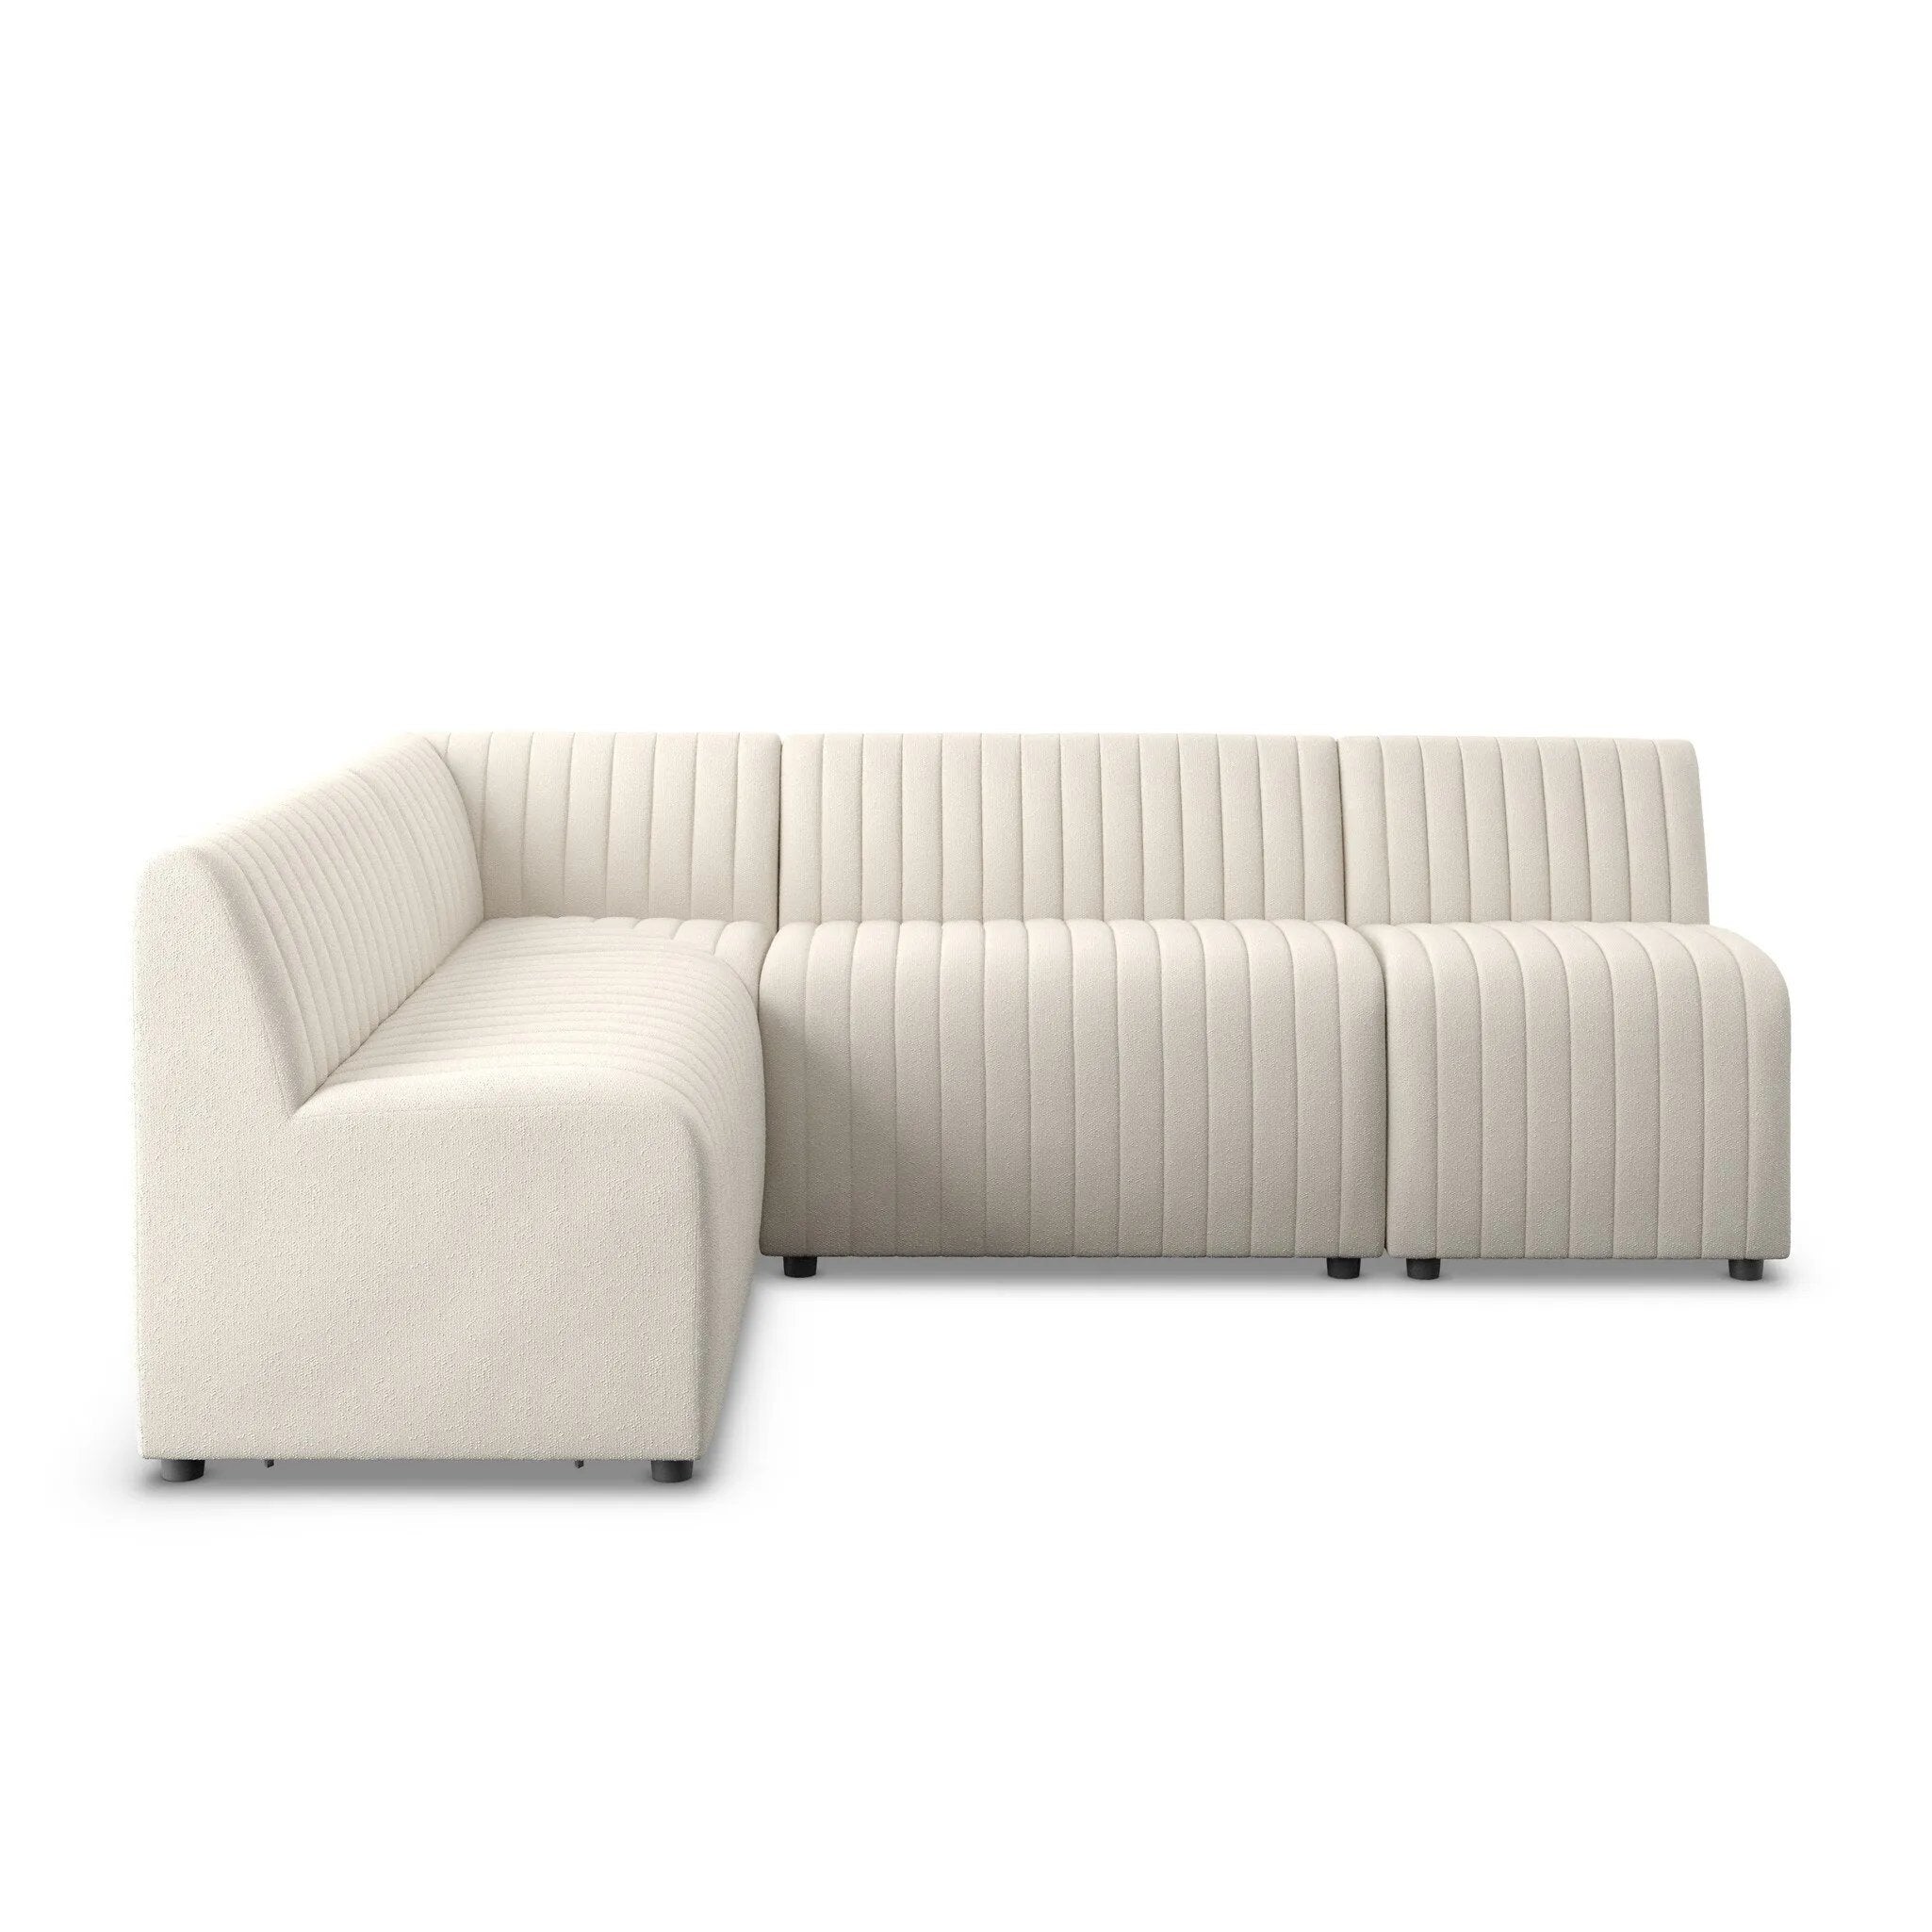 High-performance fabric in a versatile oatmeal hue features dramatic channeling, for trend-forward texture and sumptuous sit. Option to pair with matching pieces for clever modularity.Overall Dimensions91.50"w x 66.50"d x 31.50"hFull Details &amp; SpecificationsTear SheetBack Cushion Attachment : Fixe Amethyst Home provides interior design, new home construction design consulting, vintage area rugs, and lighting in the Newport Beach metro area.